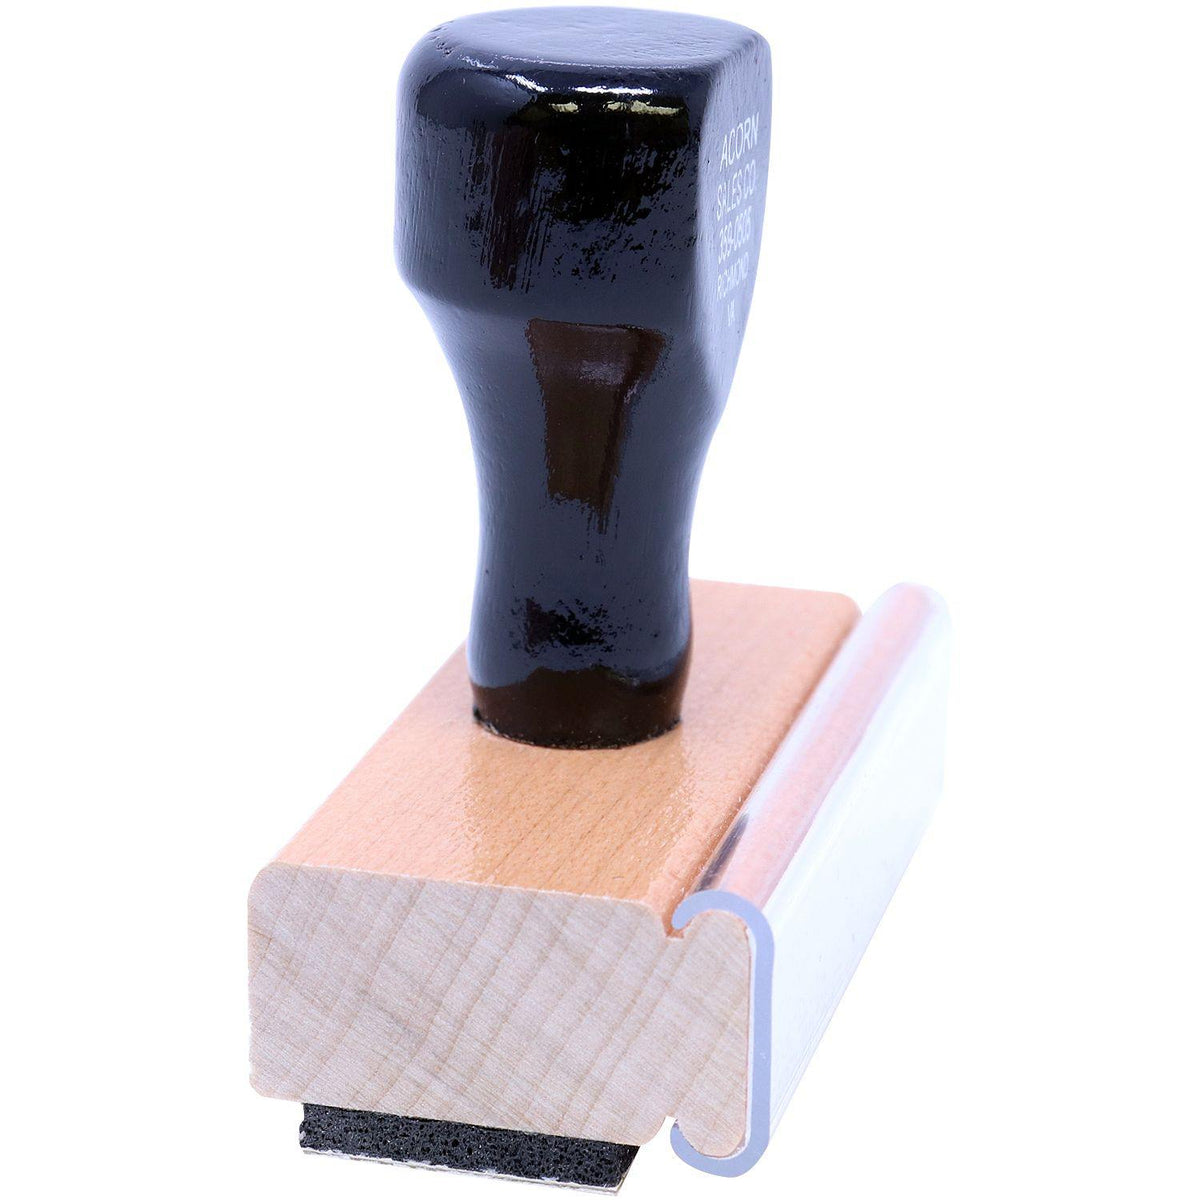 Side View of Large Classified Rubber Stamp at an Angle